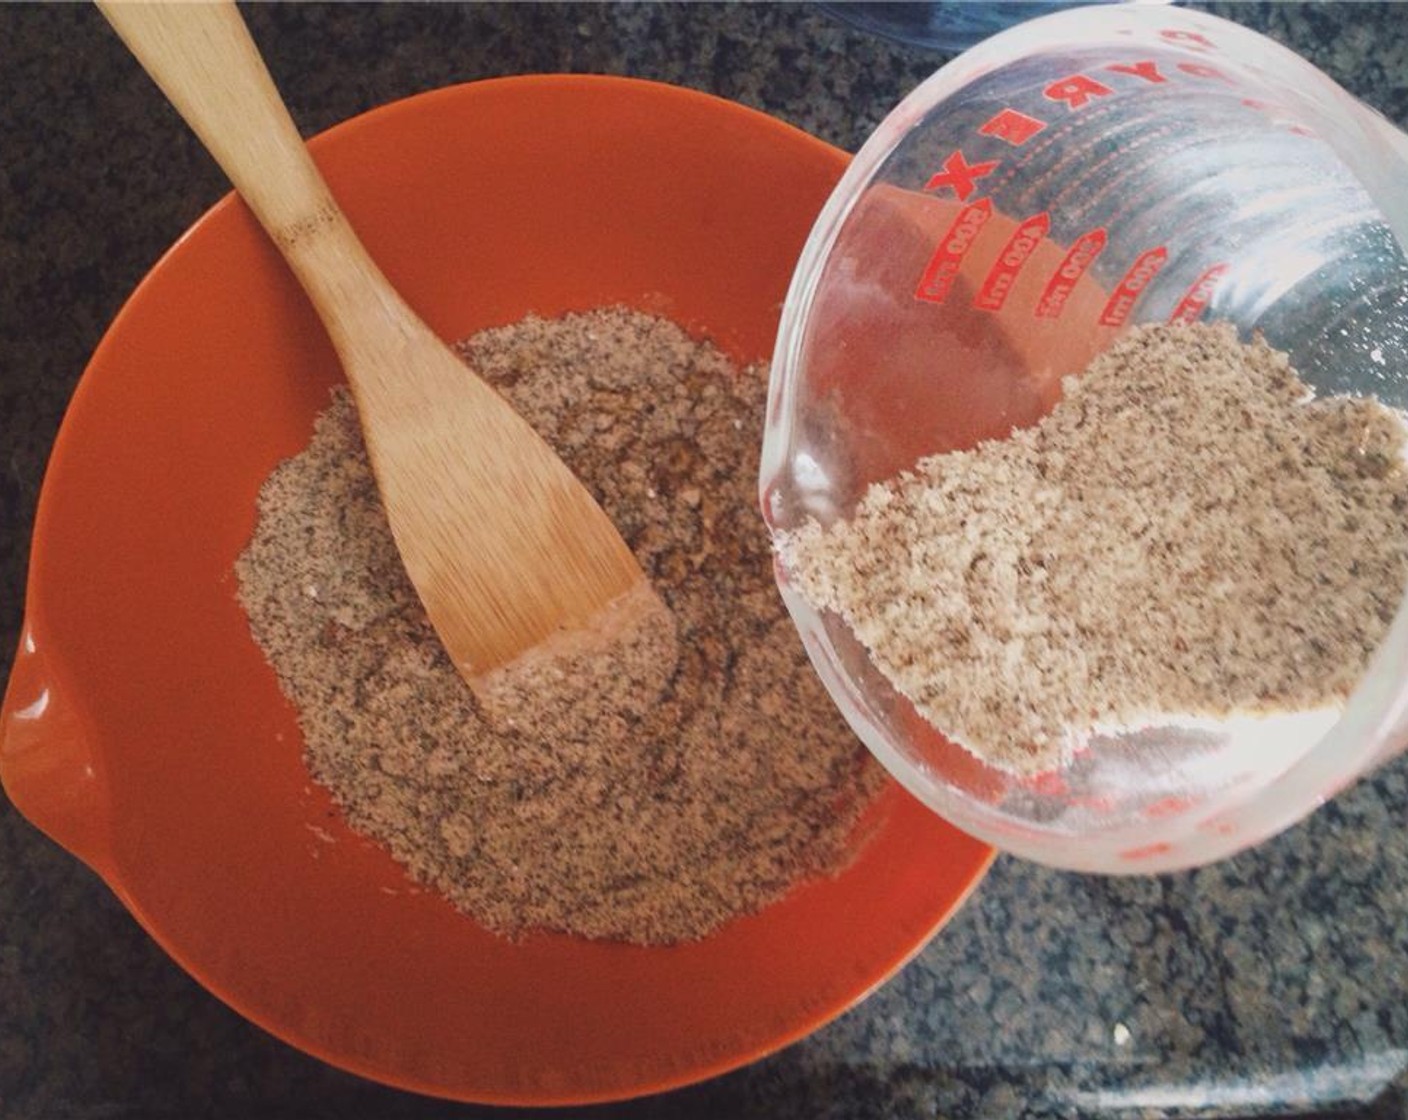 step 4 In a separate container, stir together the Almond Meal (1 1/4 cups), Sea Salt (1/4 tsp), and Baking Powder (1/2 tsp). Combine the dry mixture into the large mixing bowl.